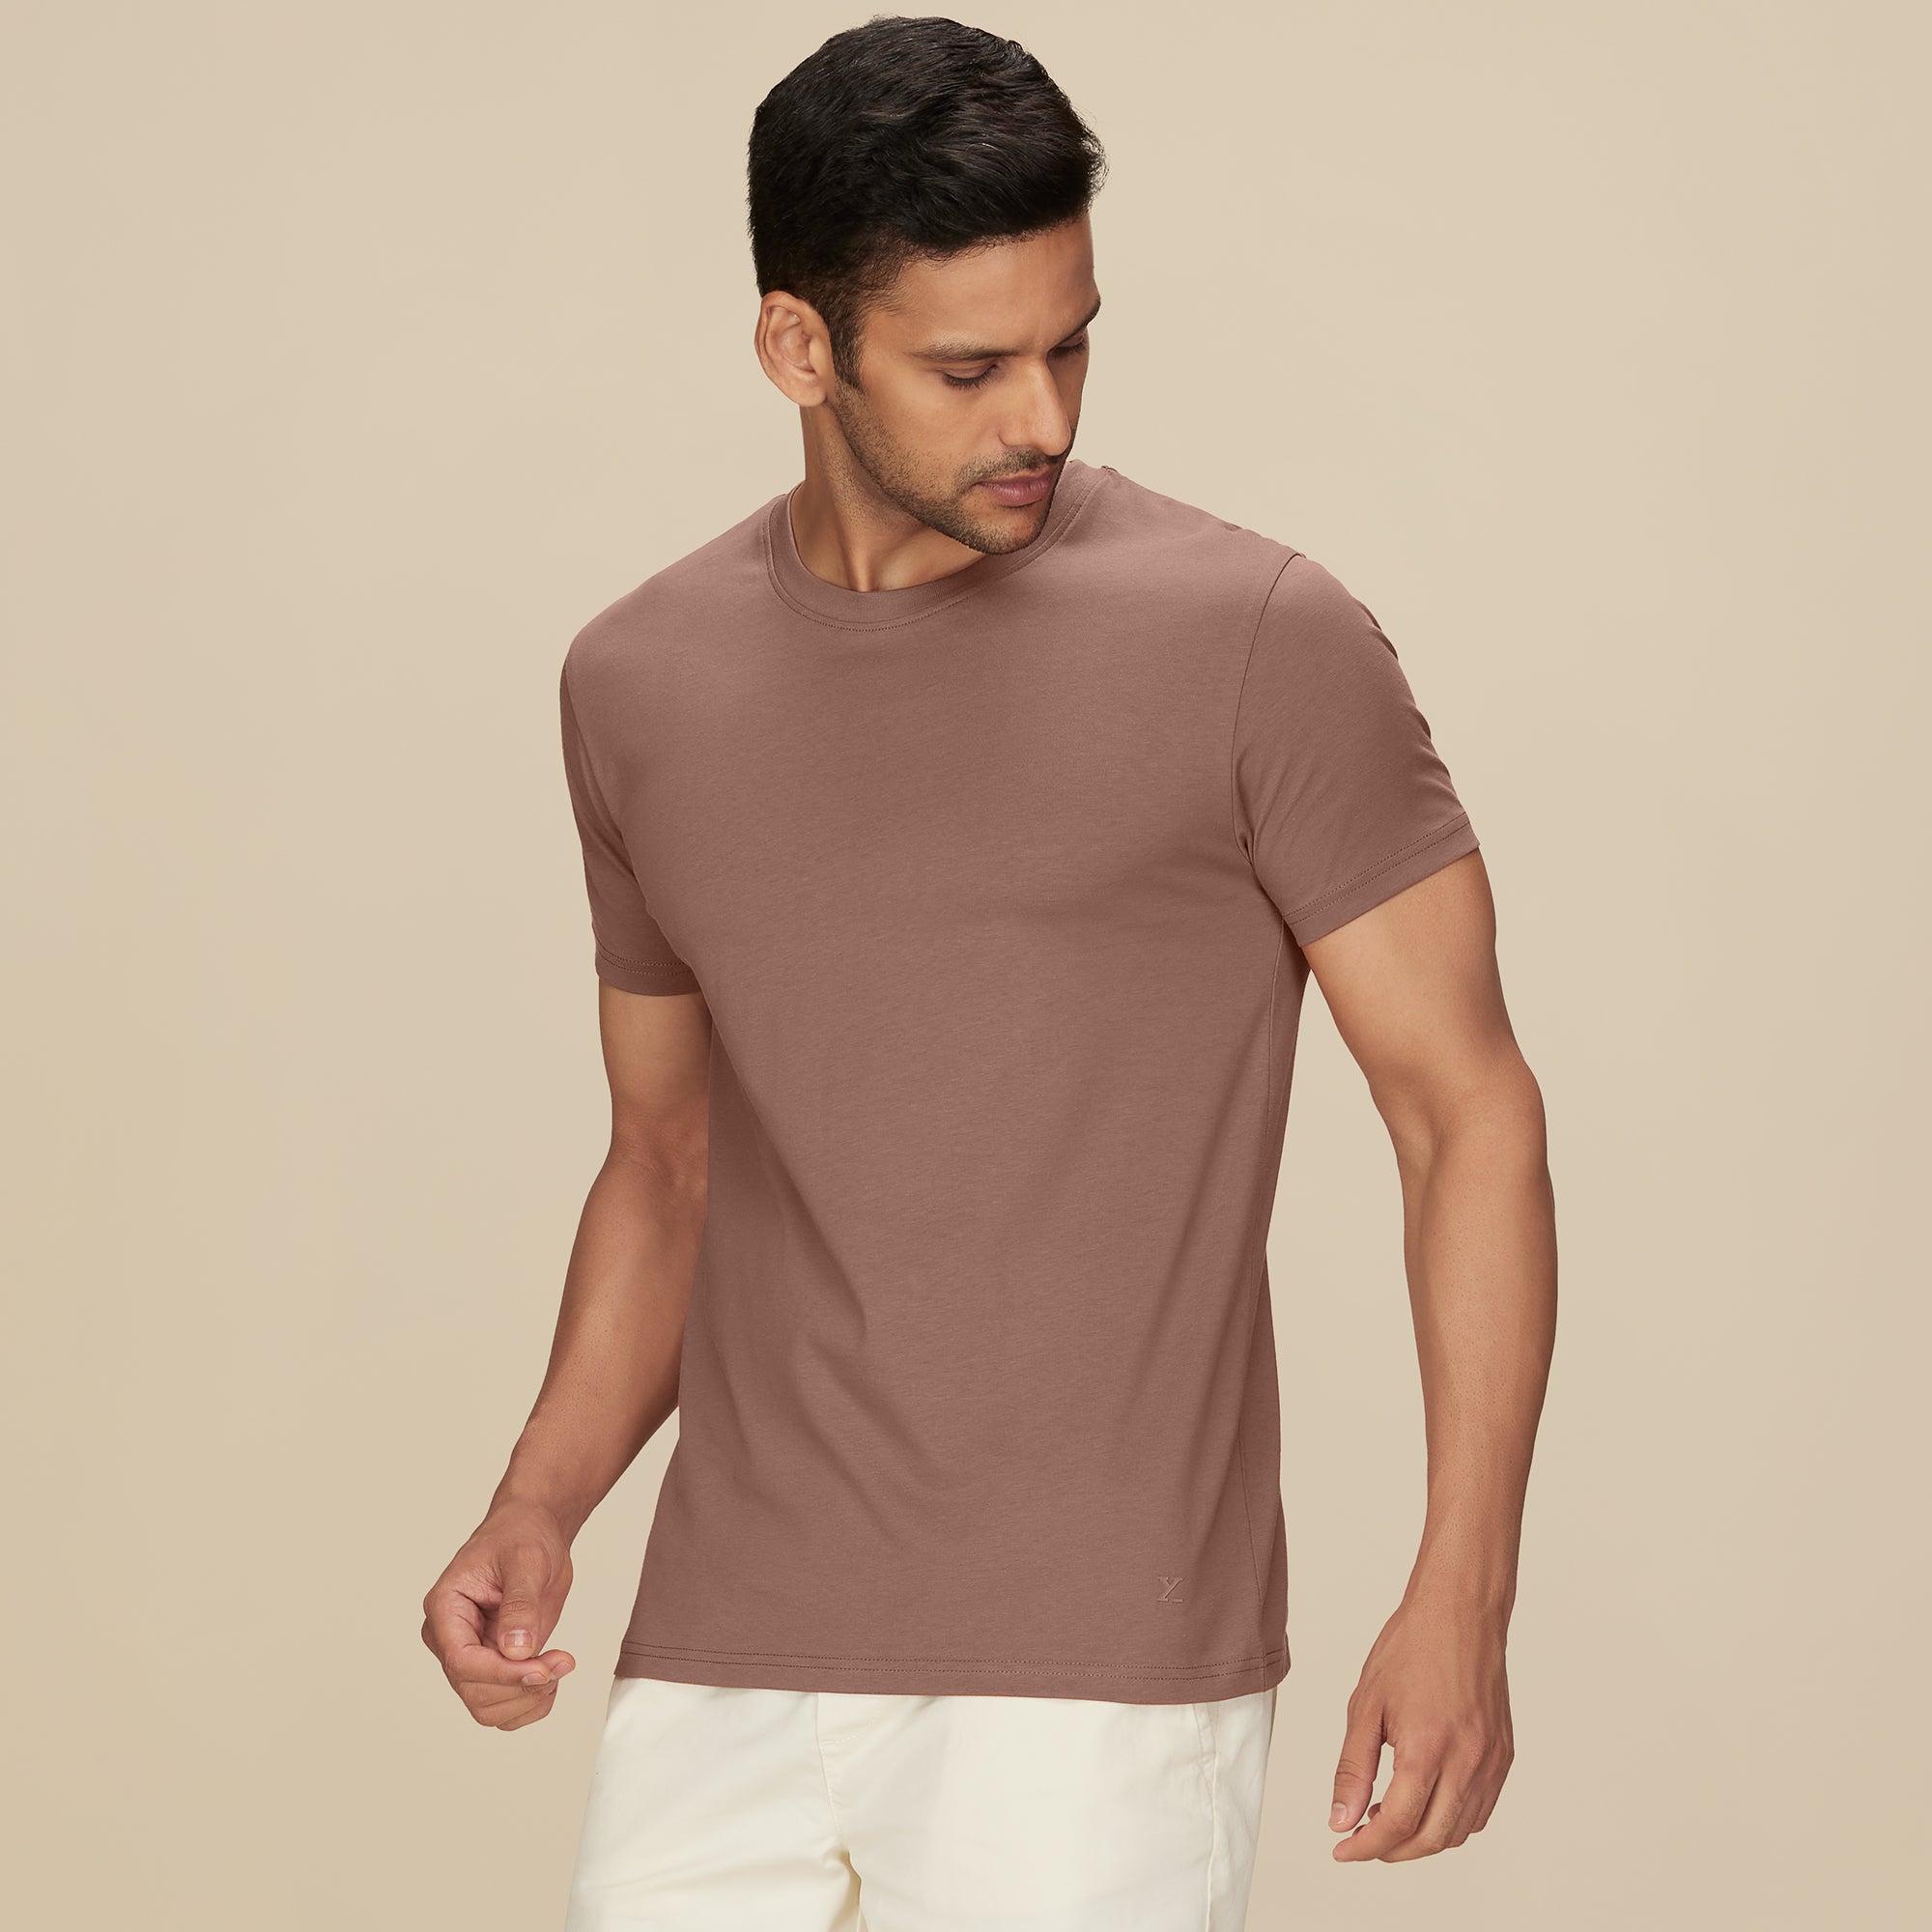 Pace Combed Cotton T-shirts For Men Brown Latte - XYXX Crew